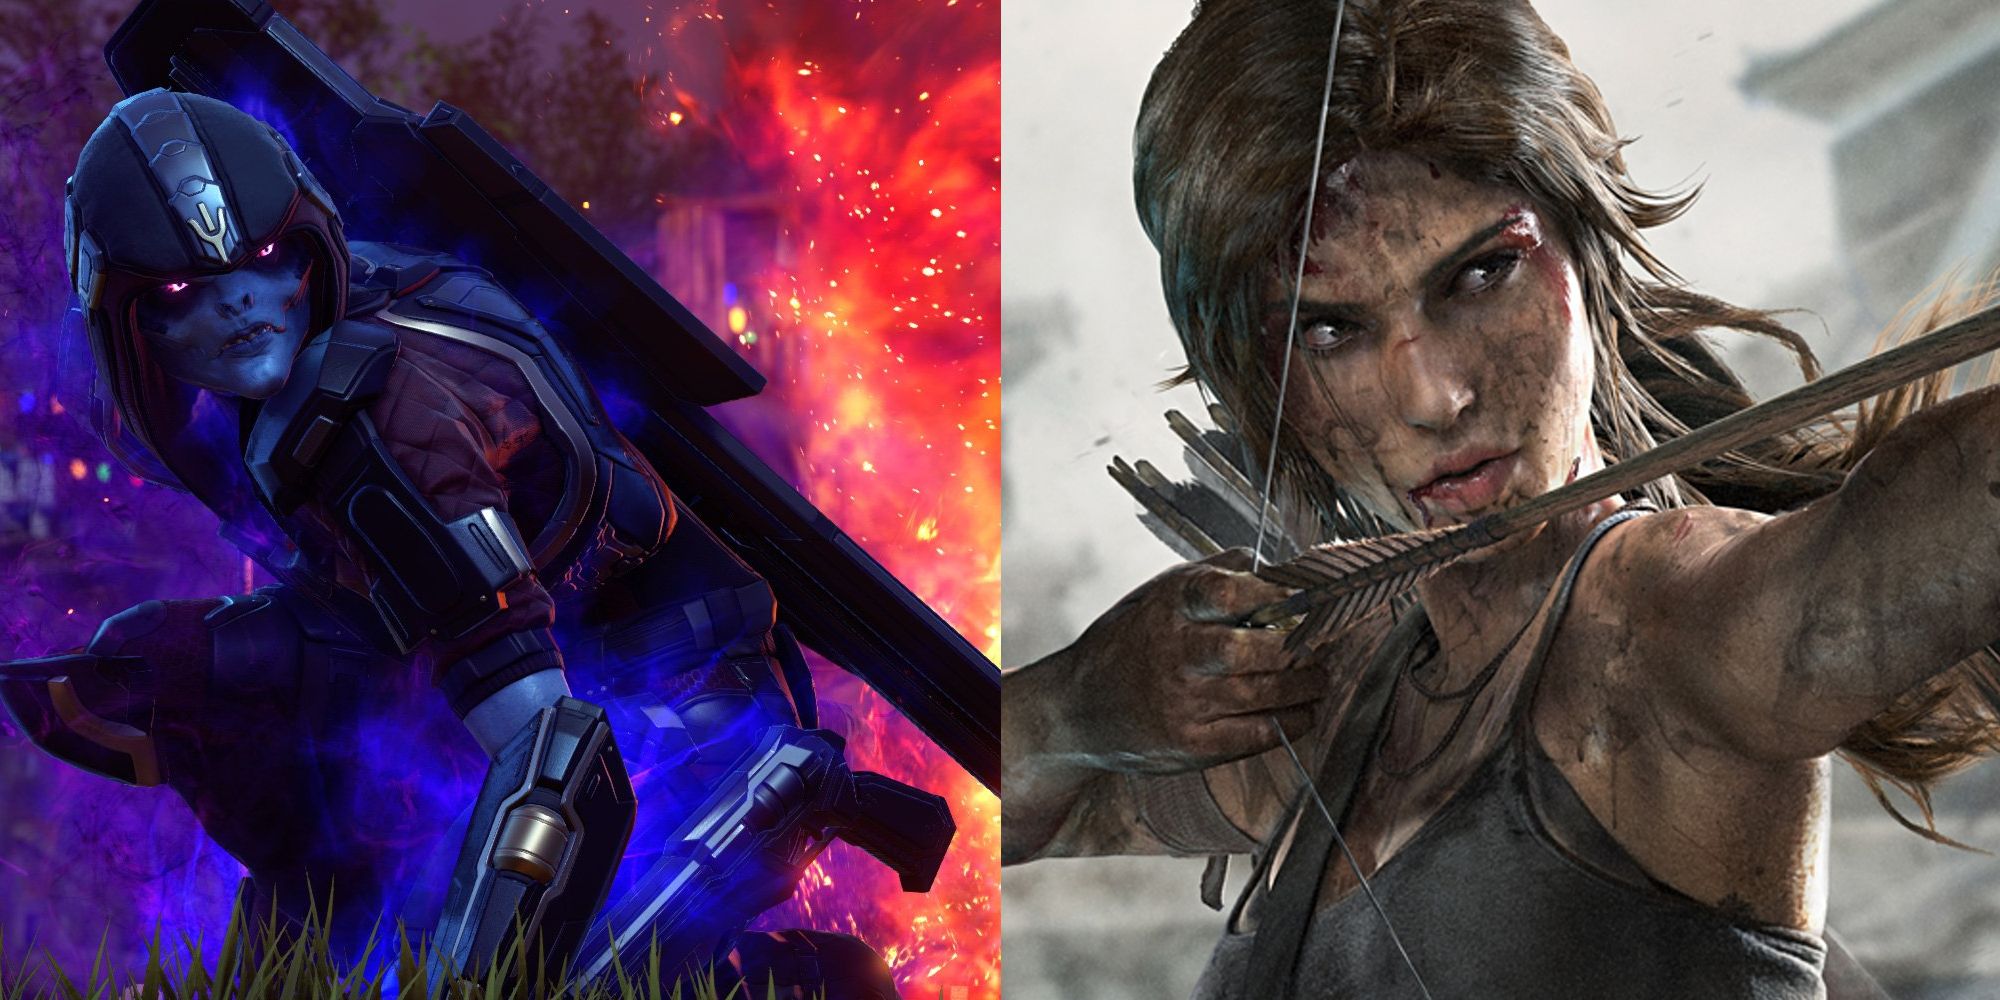 Split image of an alien in XCOM 2 and Lara Croft aiming her bow in Tomb Raider 2013